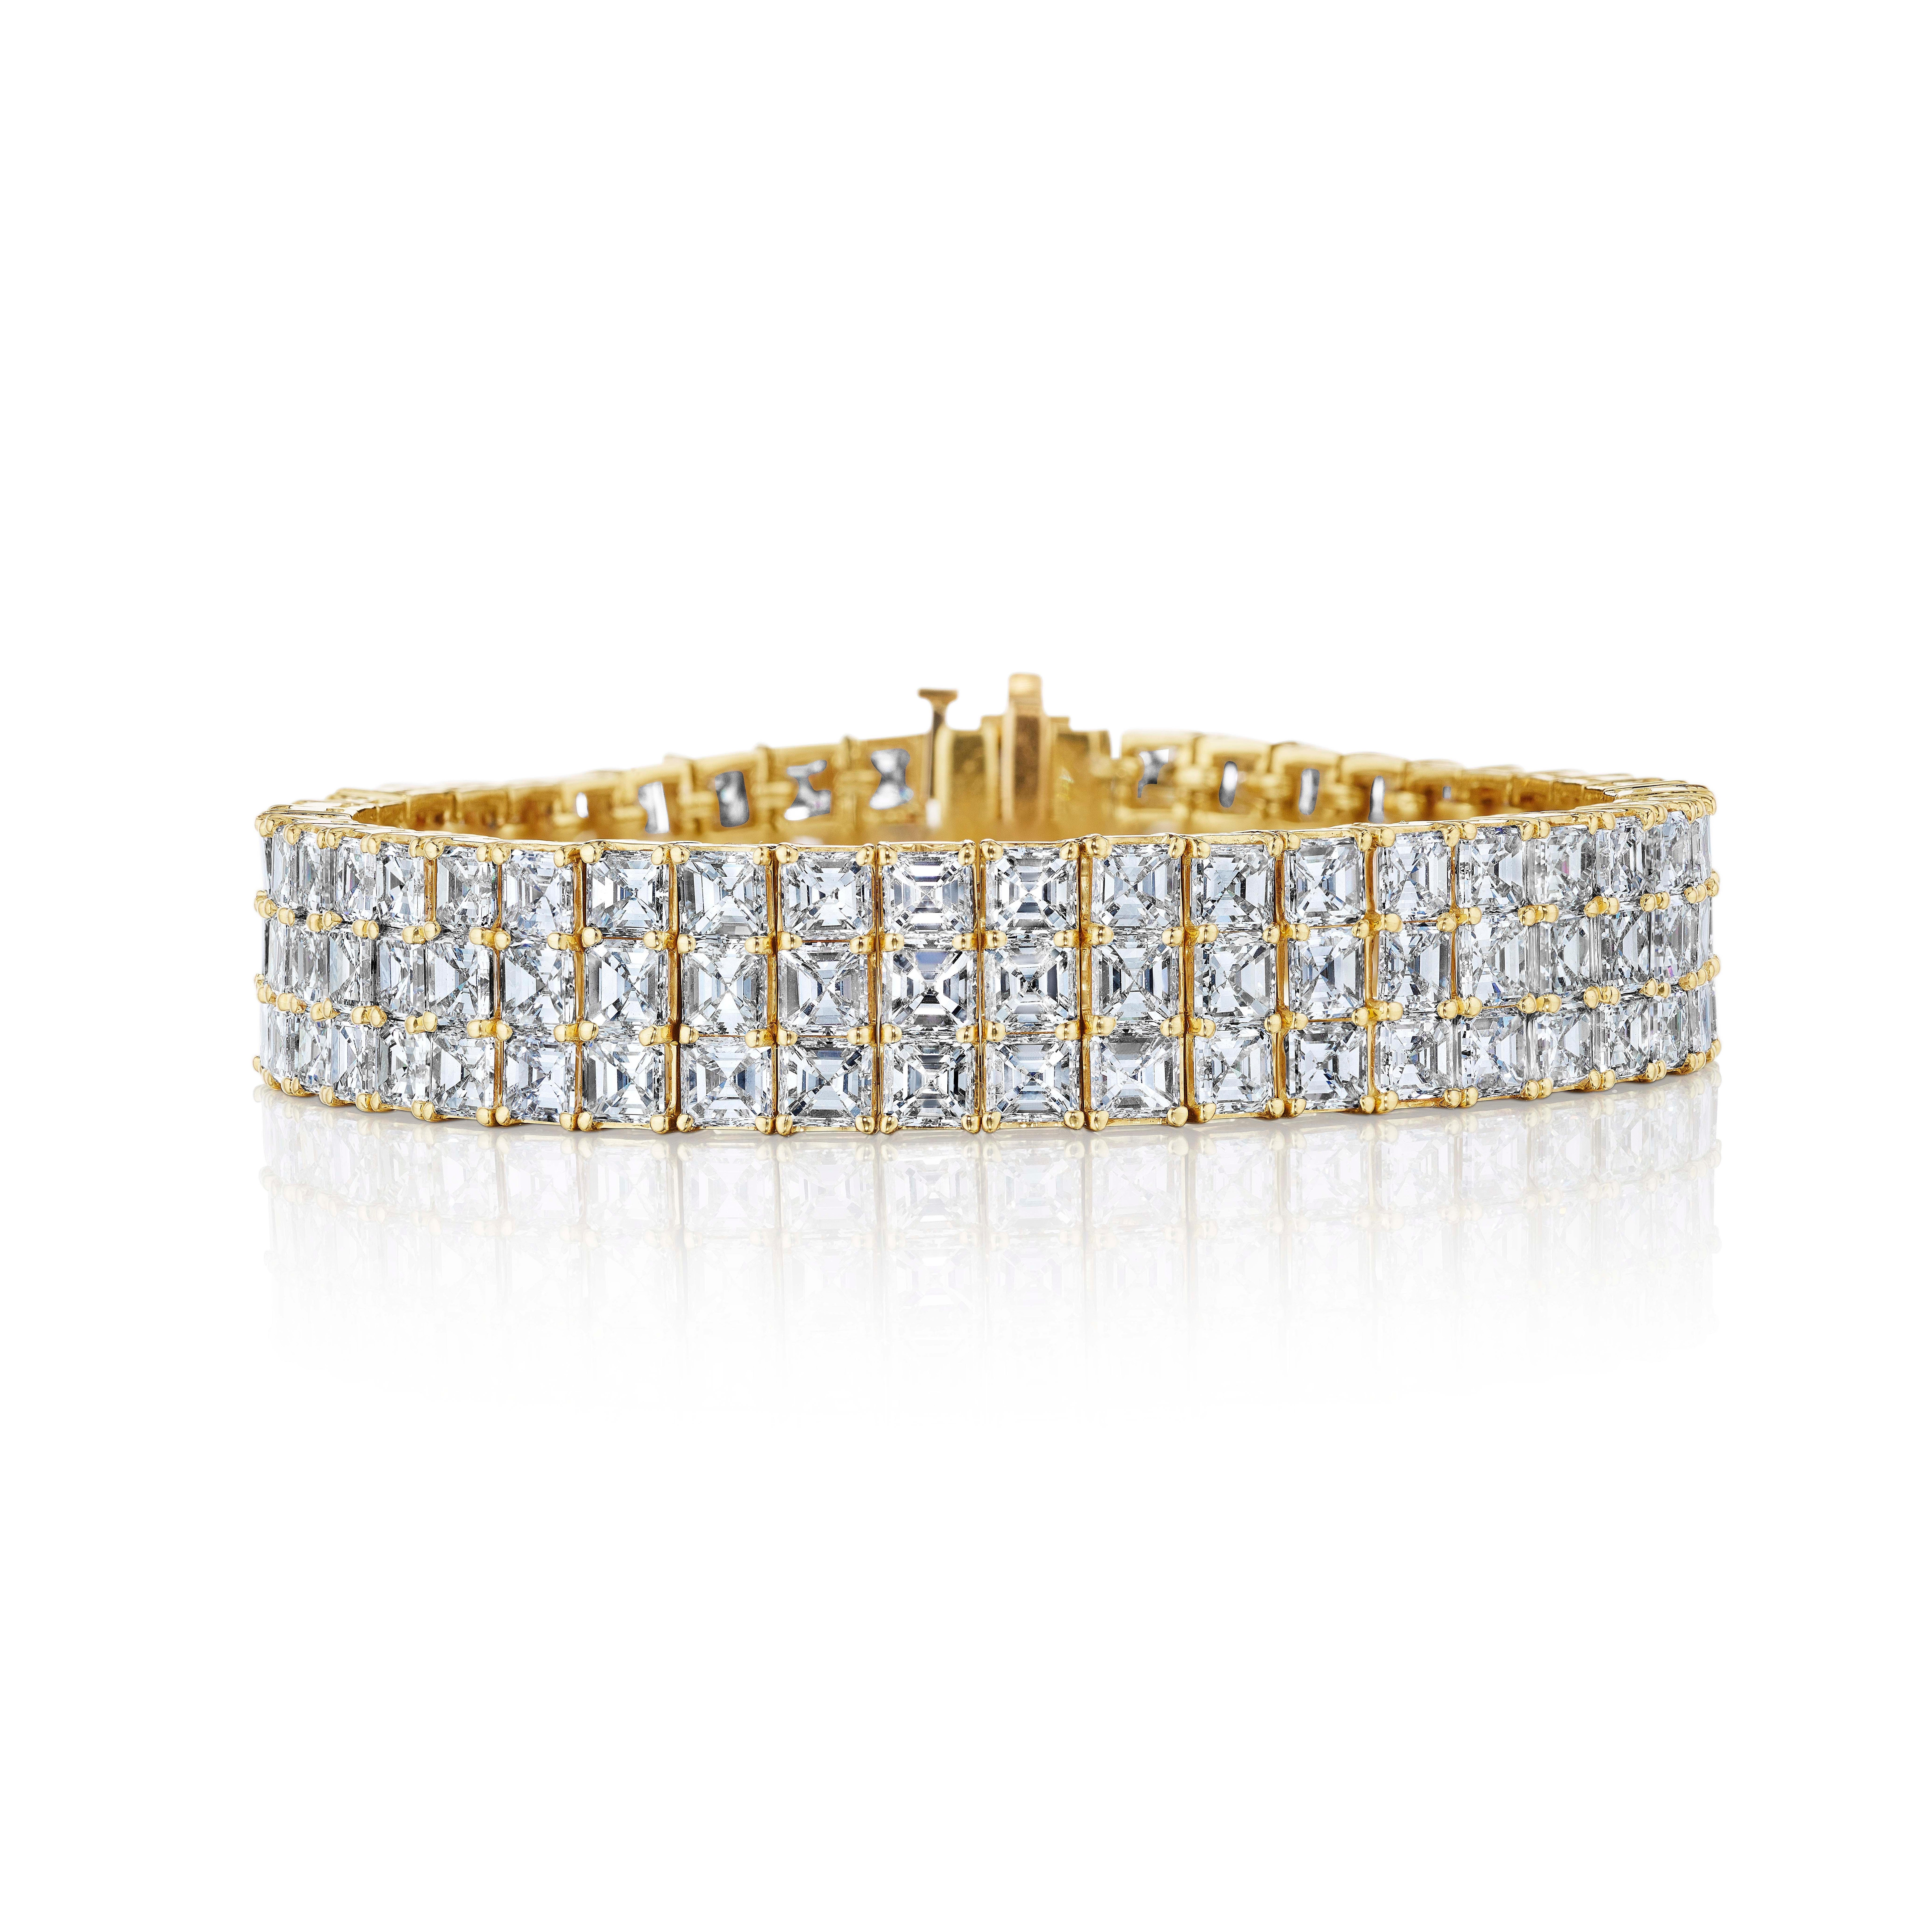 This beautiful Statement bracelet features 135 perfectly matched Asscher Cut Diamonds in a three row cuff form, but with the slight flexibility of a tennis bracelet weighing 33.89 Carats. 


Fits an 7.00 inch wrist. 
Set in 18 Karat Yellow Gold. 